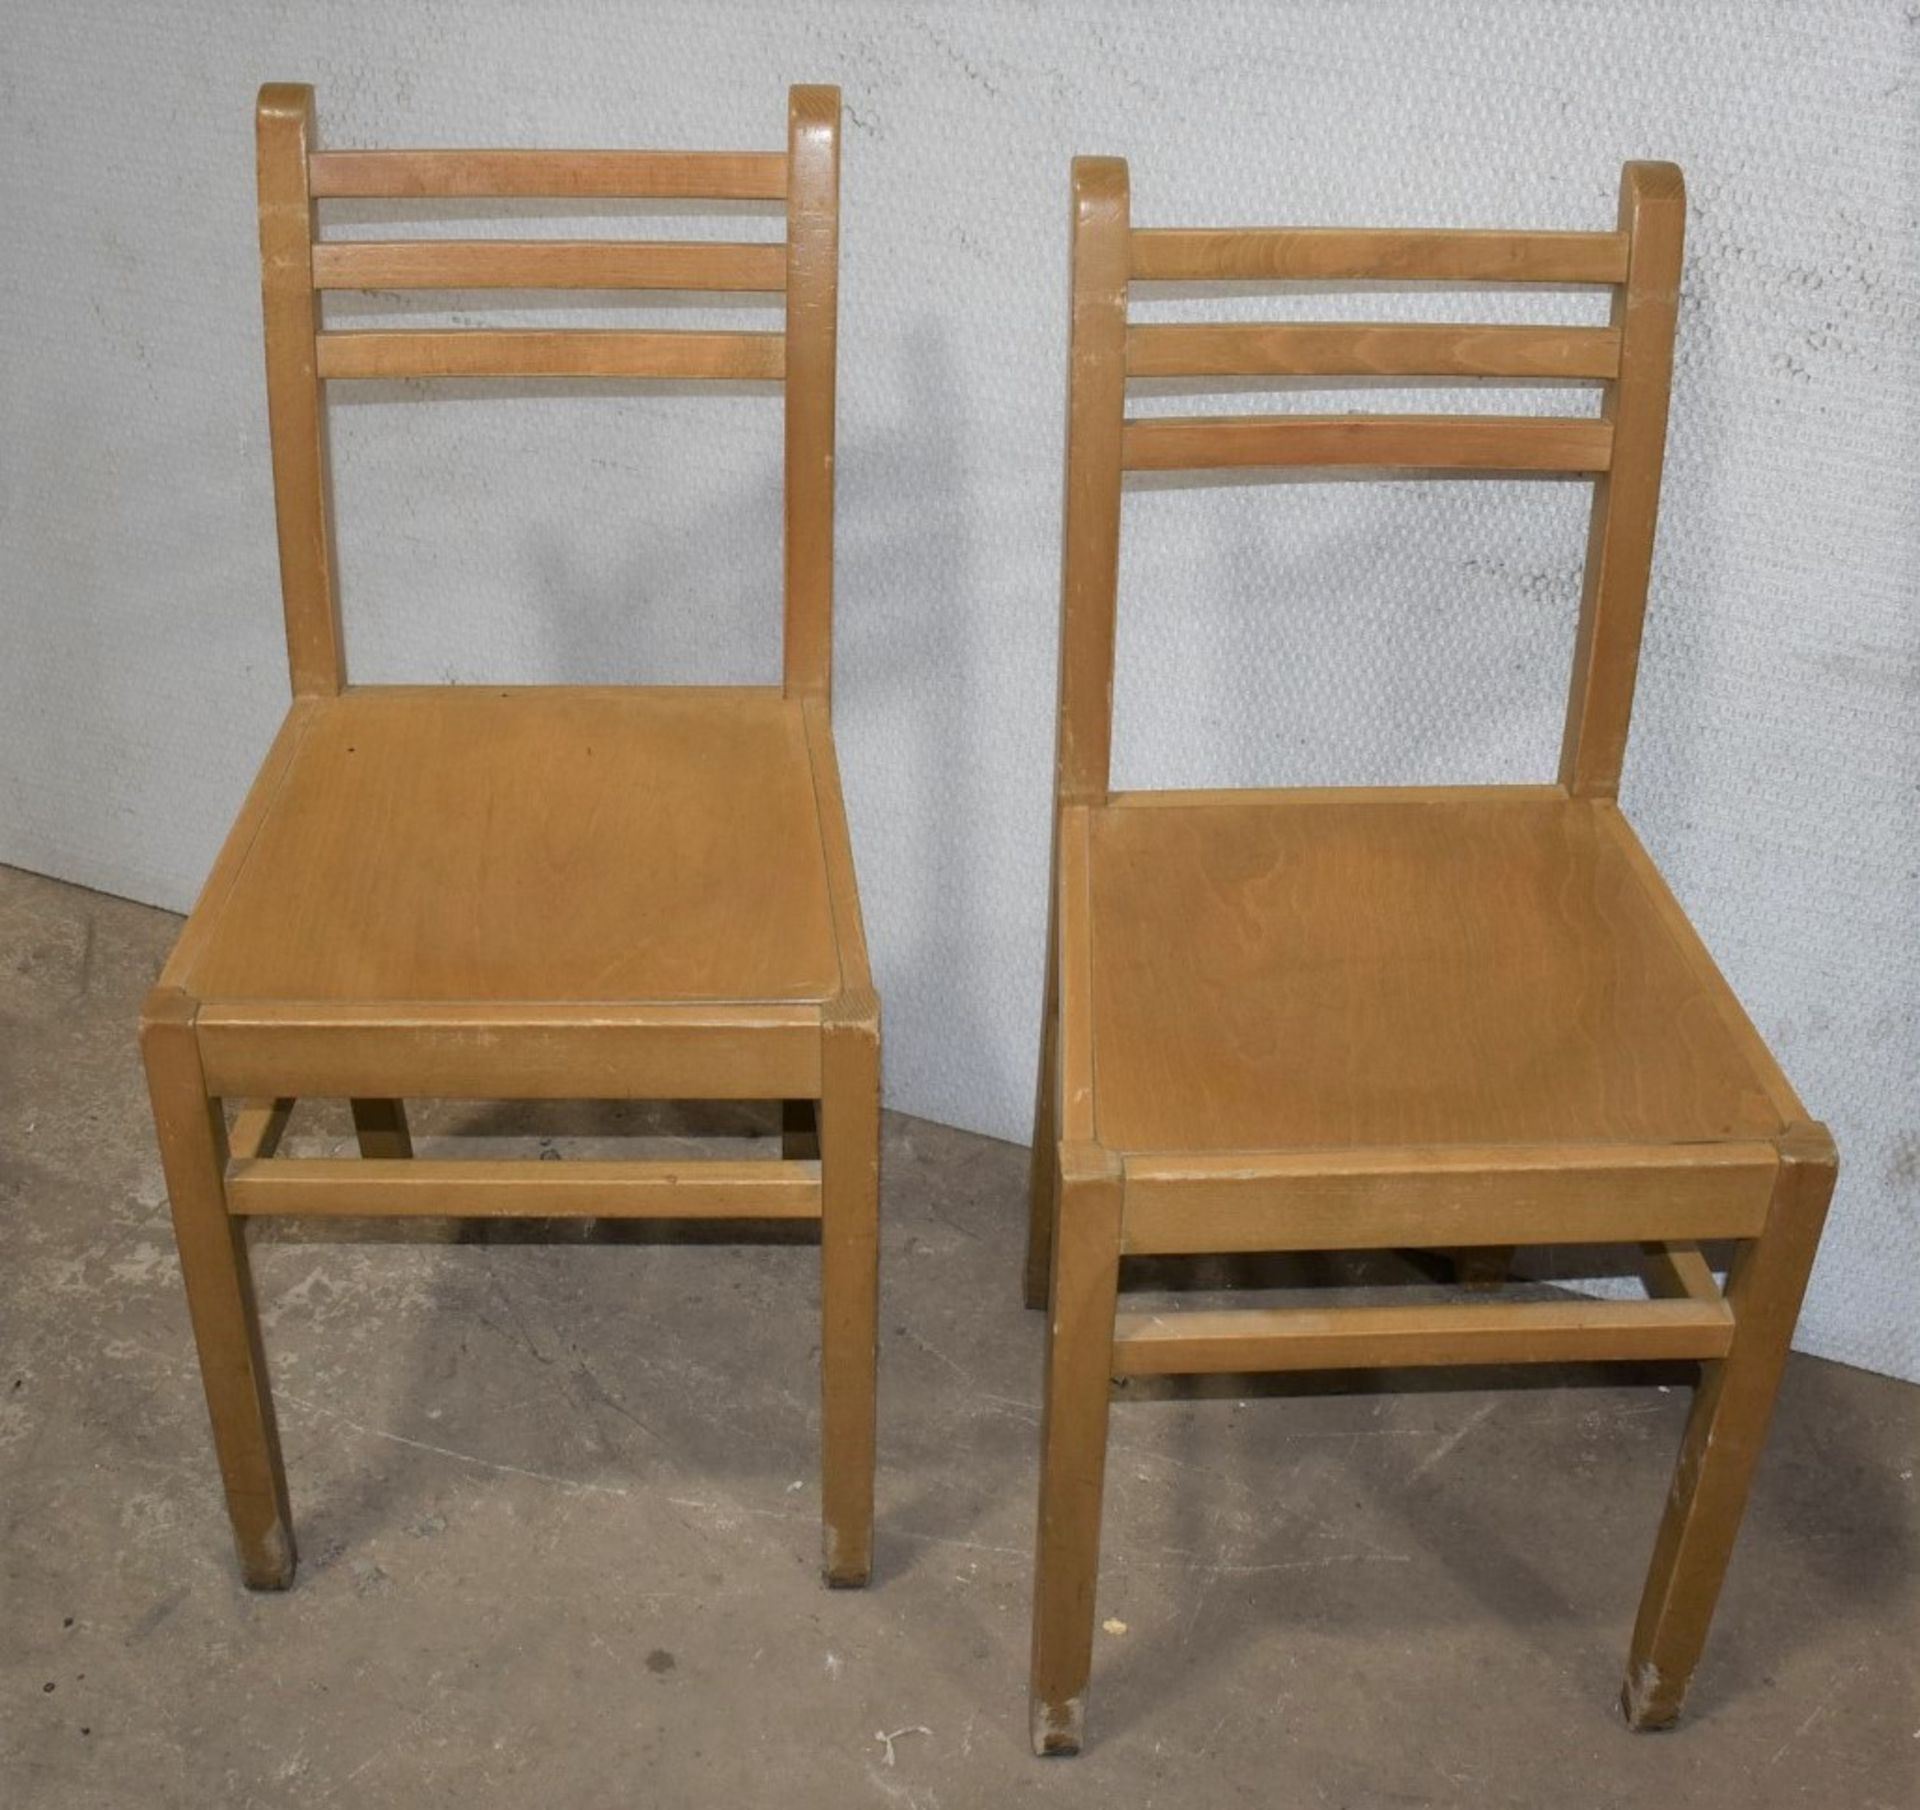 8 x Restaurant Dining Chairs With a Light Wood Finish - Image 2 of 5